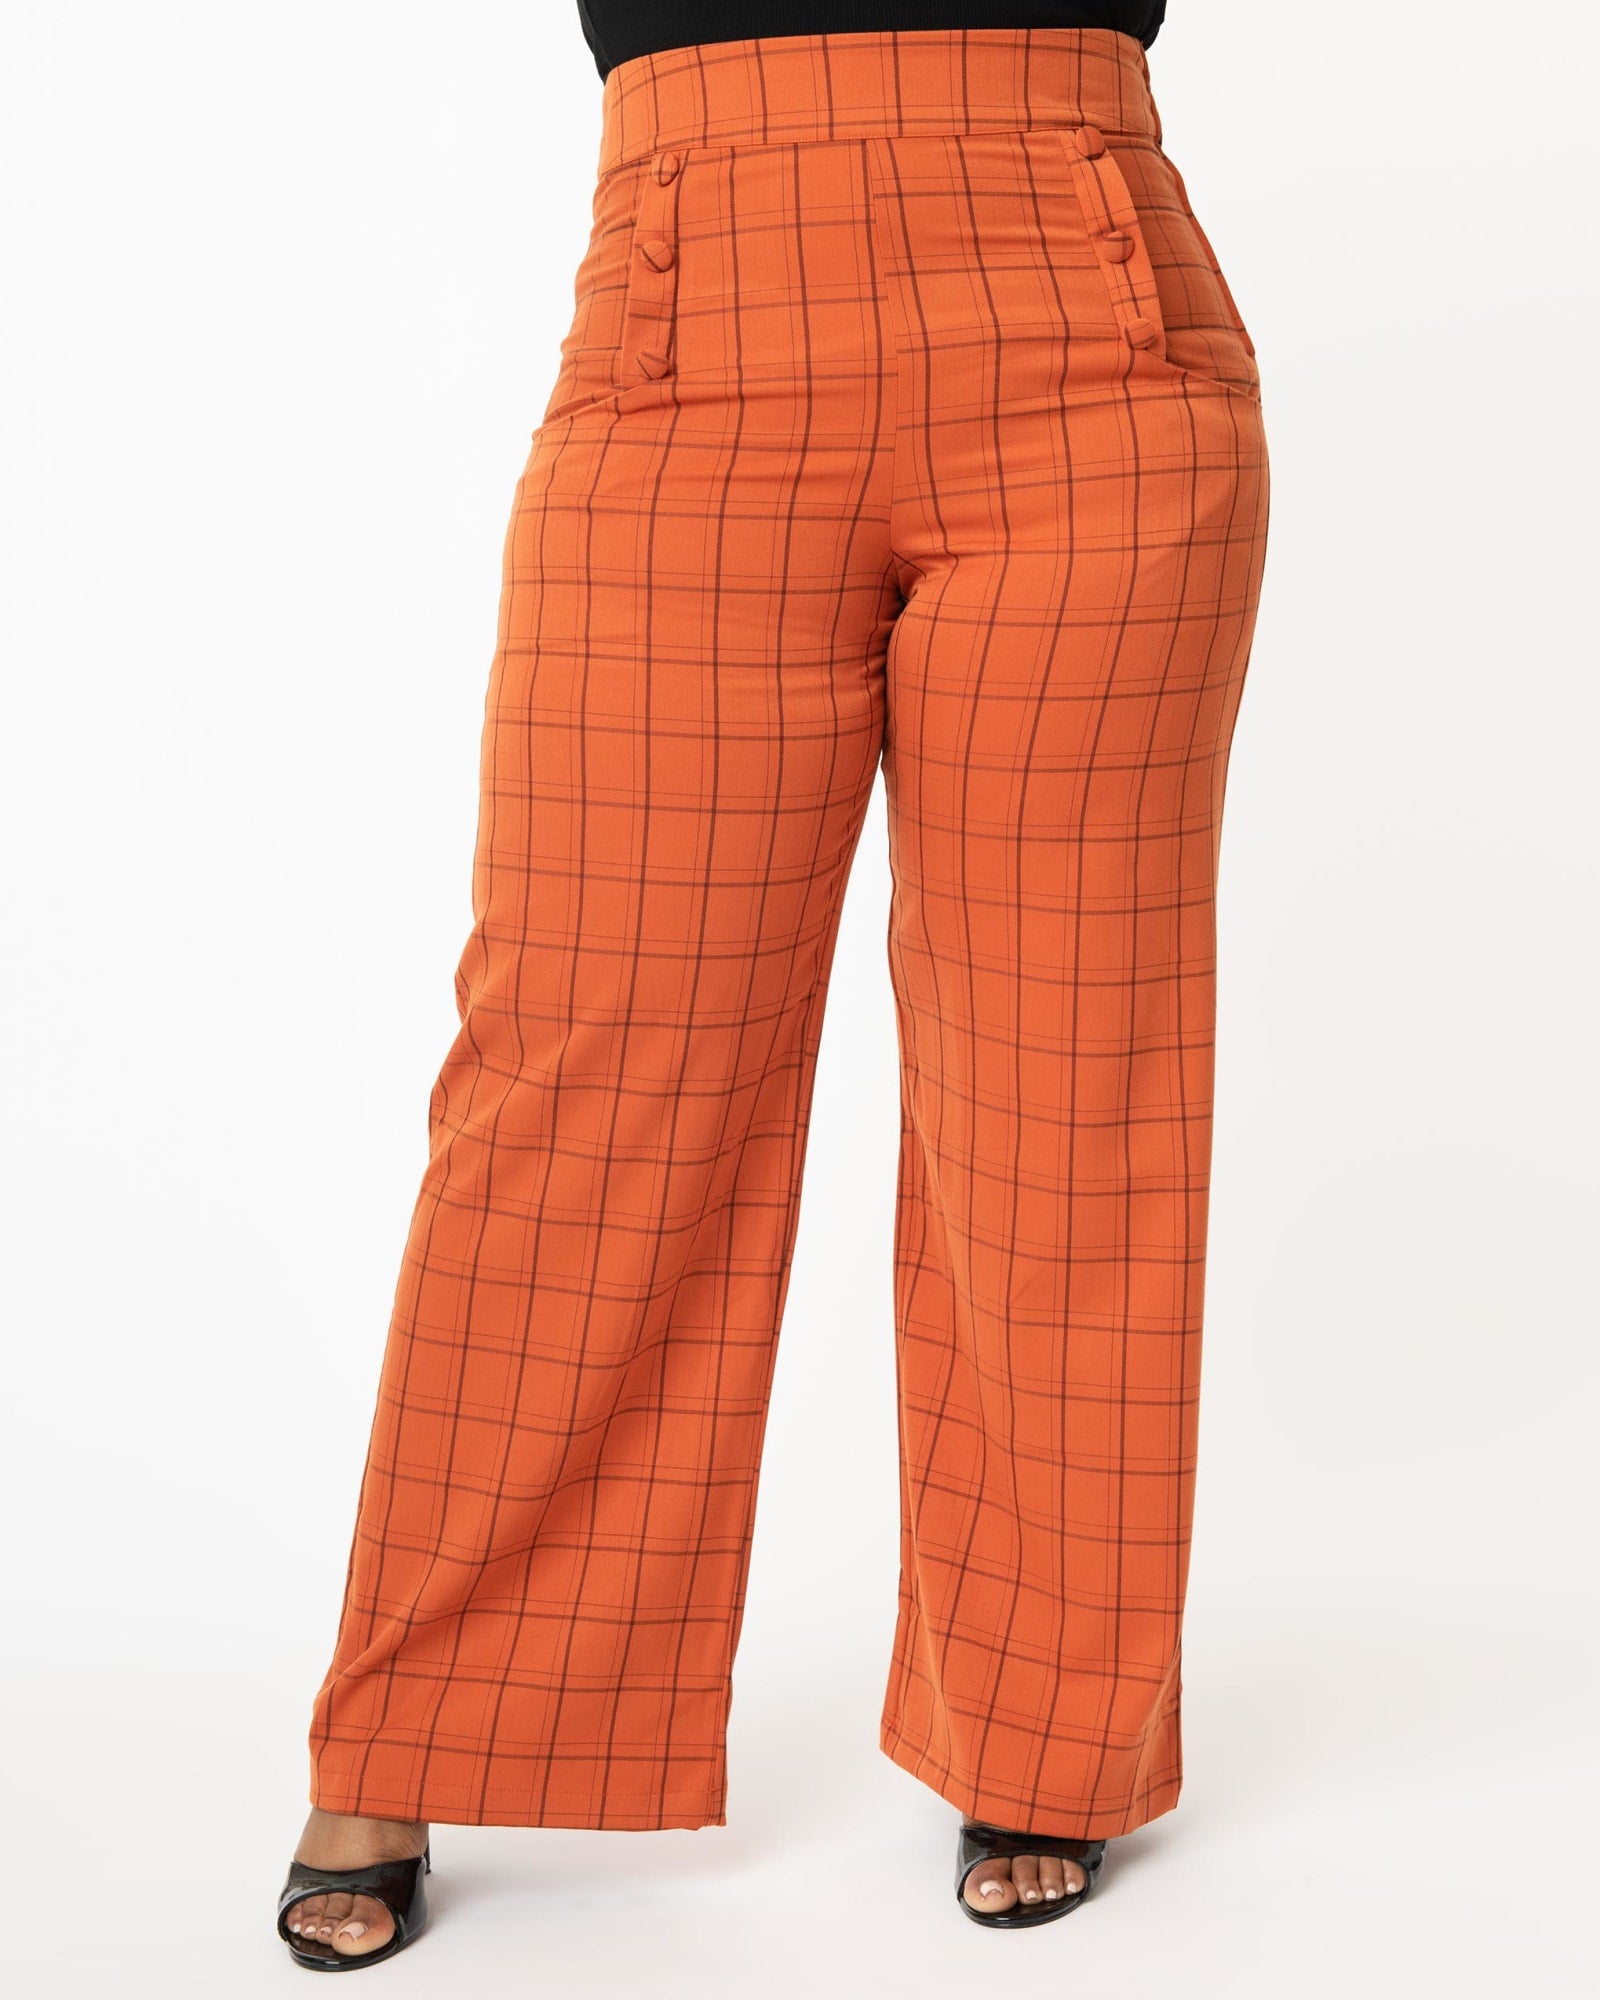 Plus Size Patterned Trousers